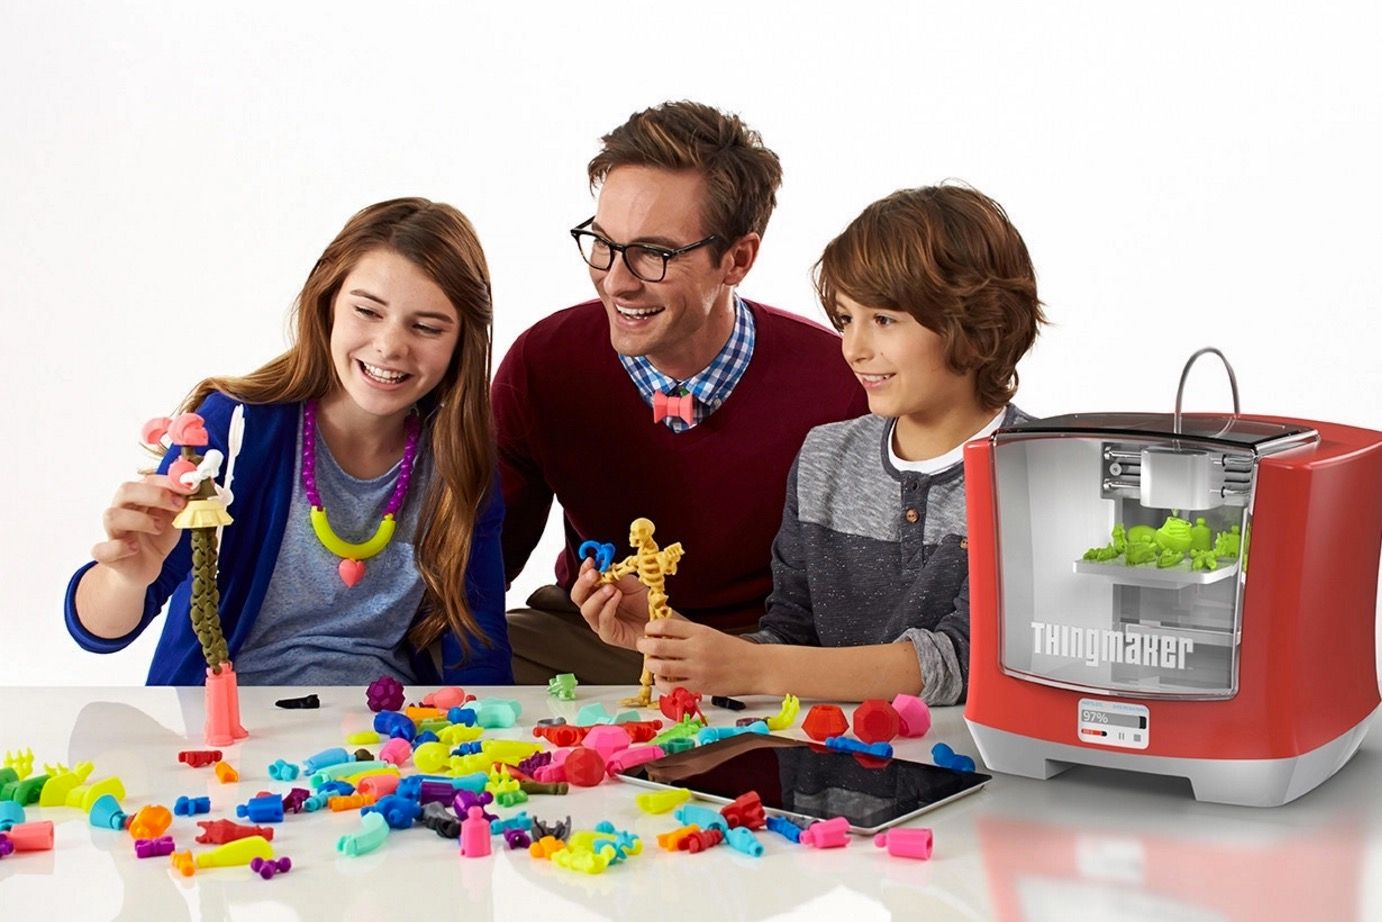 mattel brought back thingmaker as a 3d printer for kids to make toys image 1